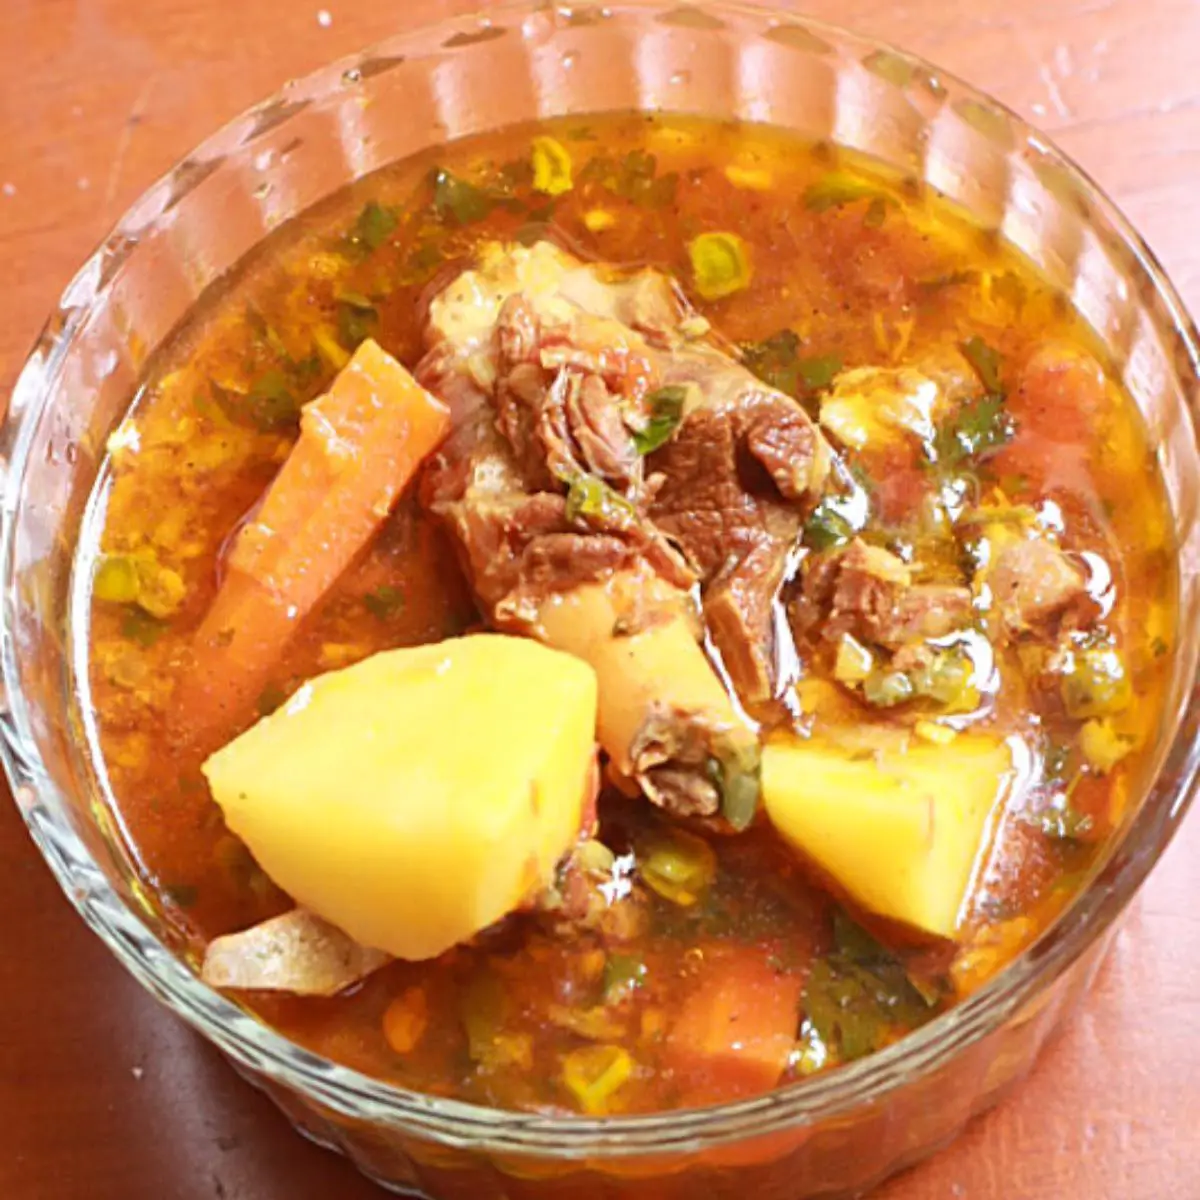 A bowl with mutton stew.